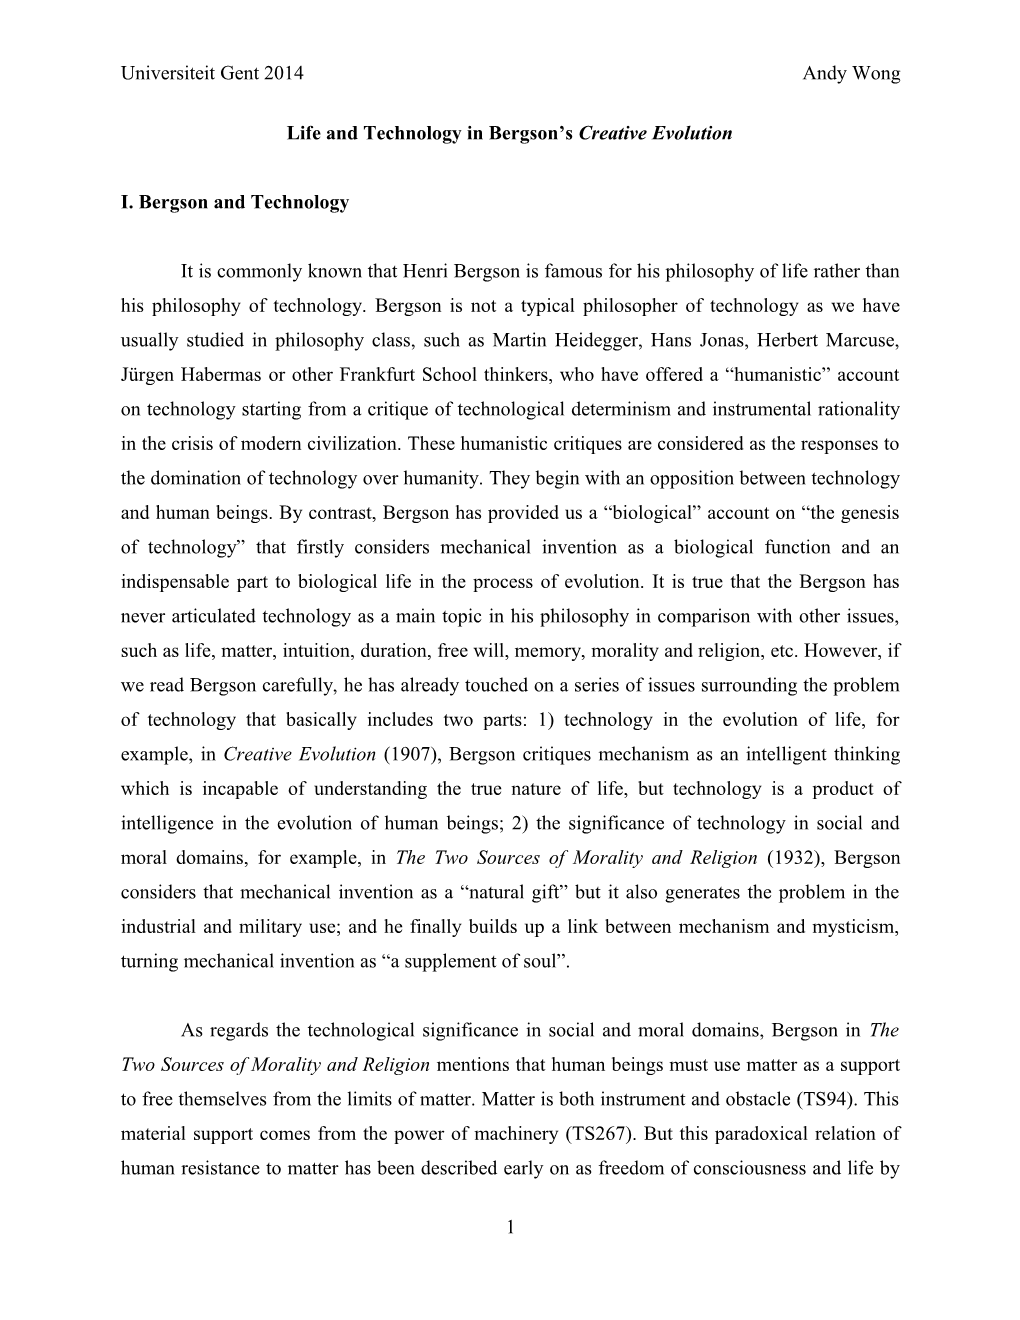 Life and Technology in Bergson S Creative Evolution